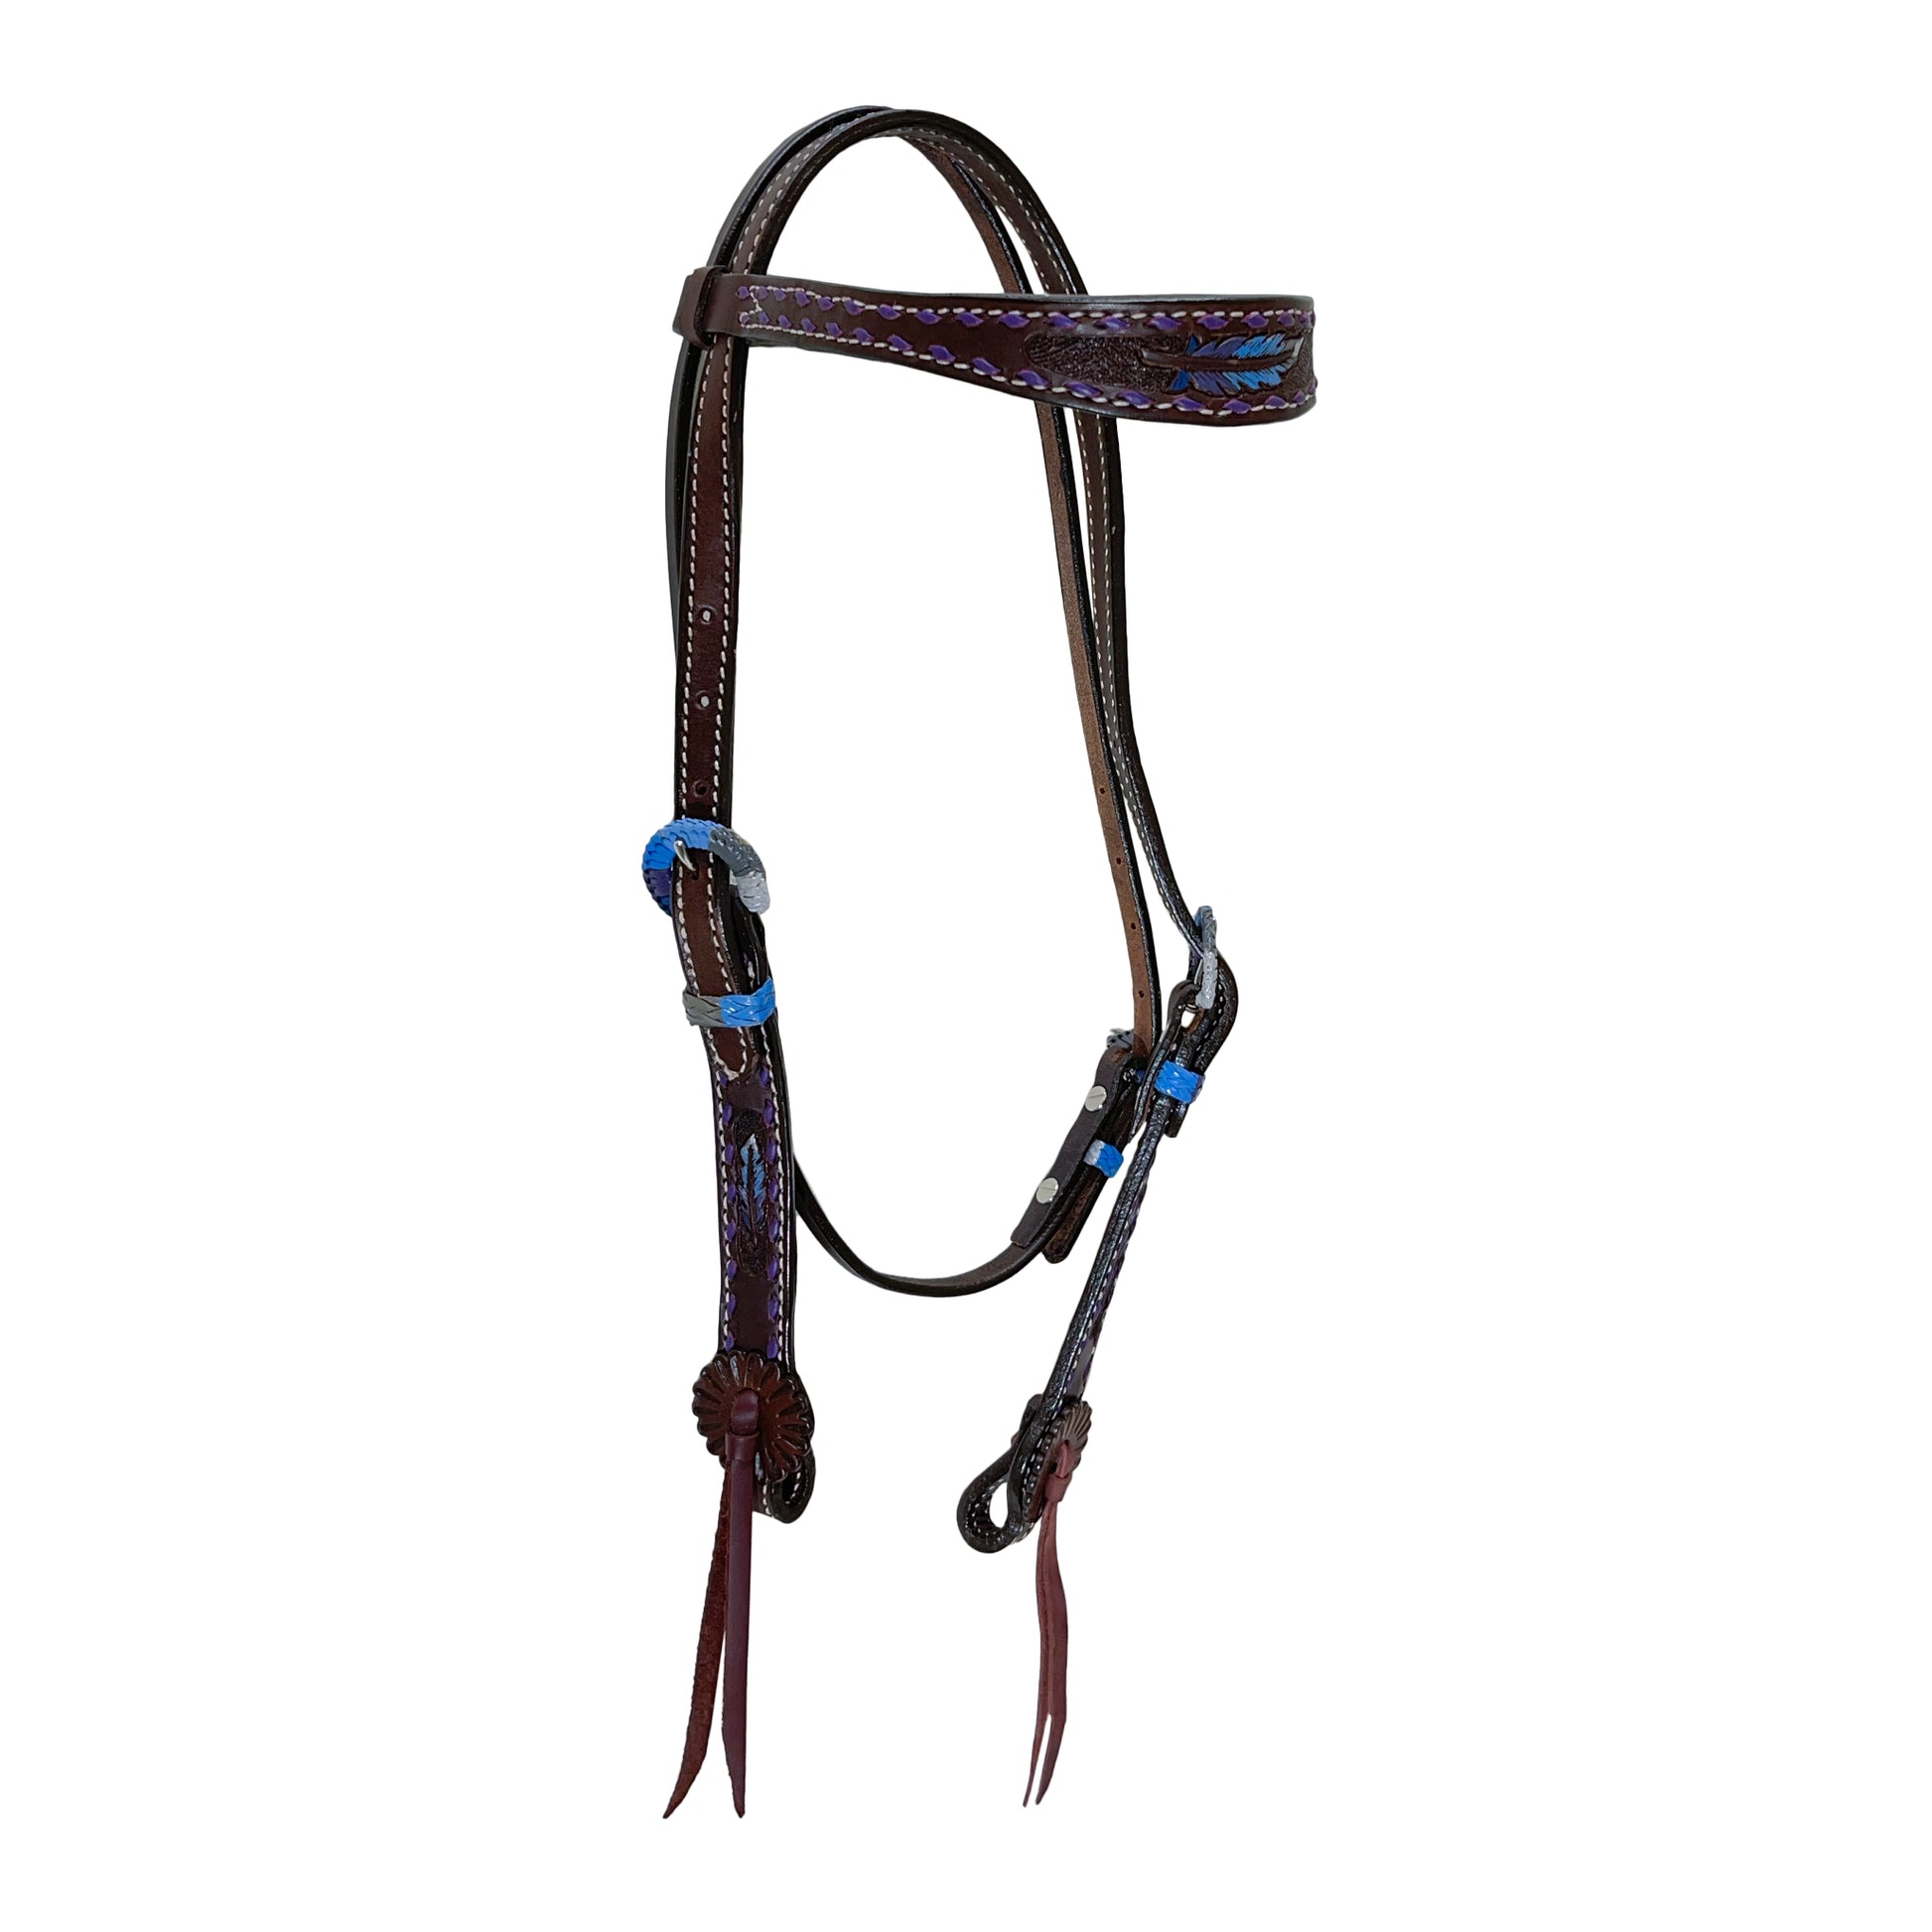 1-1/2" Contour browband headstall chocolate leather multicolored feather tooled with purple buckstitch, multicolored Spanish lace hardware, and loops.